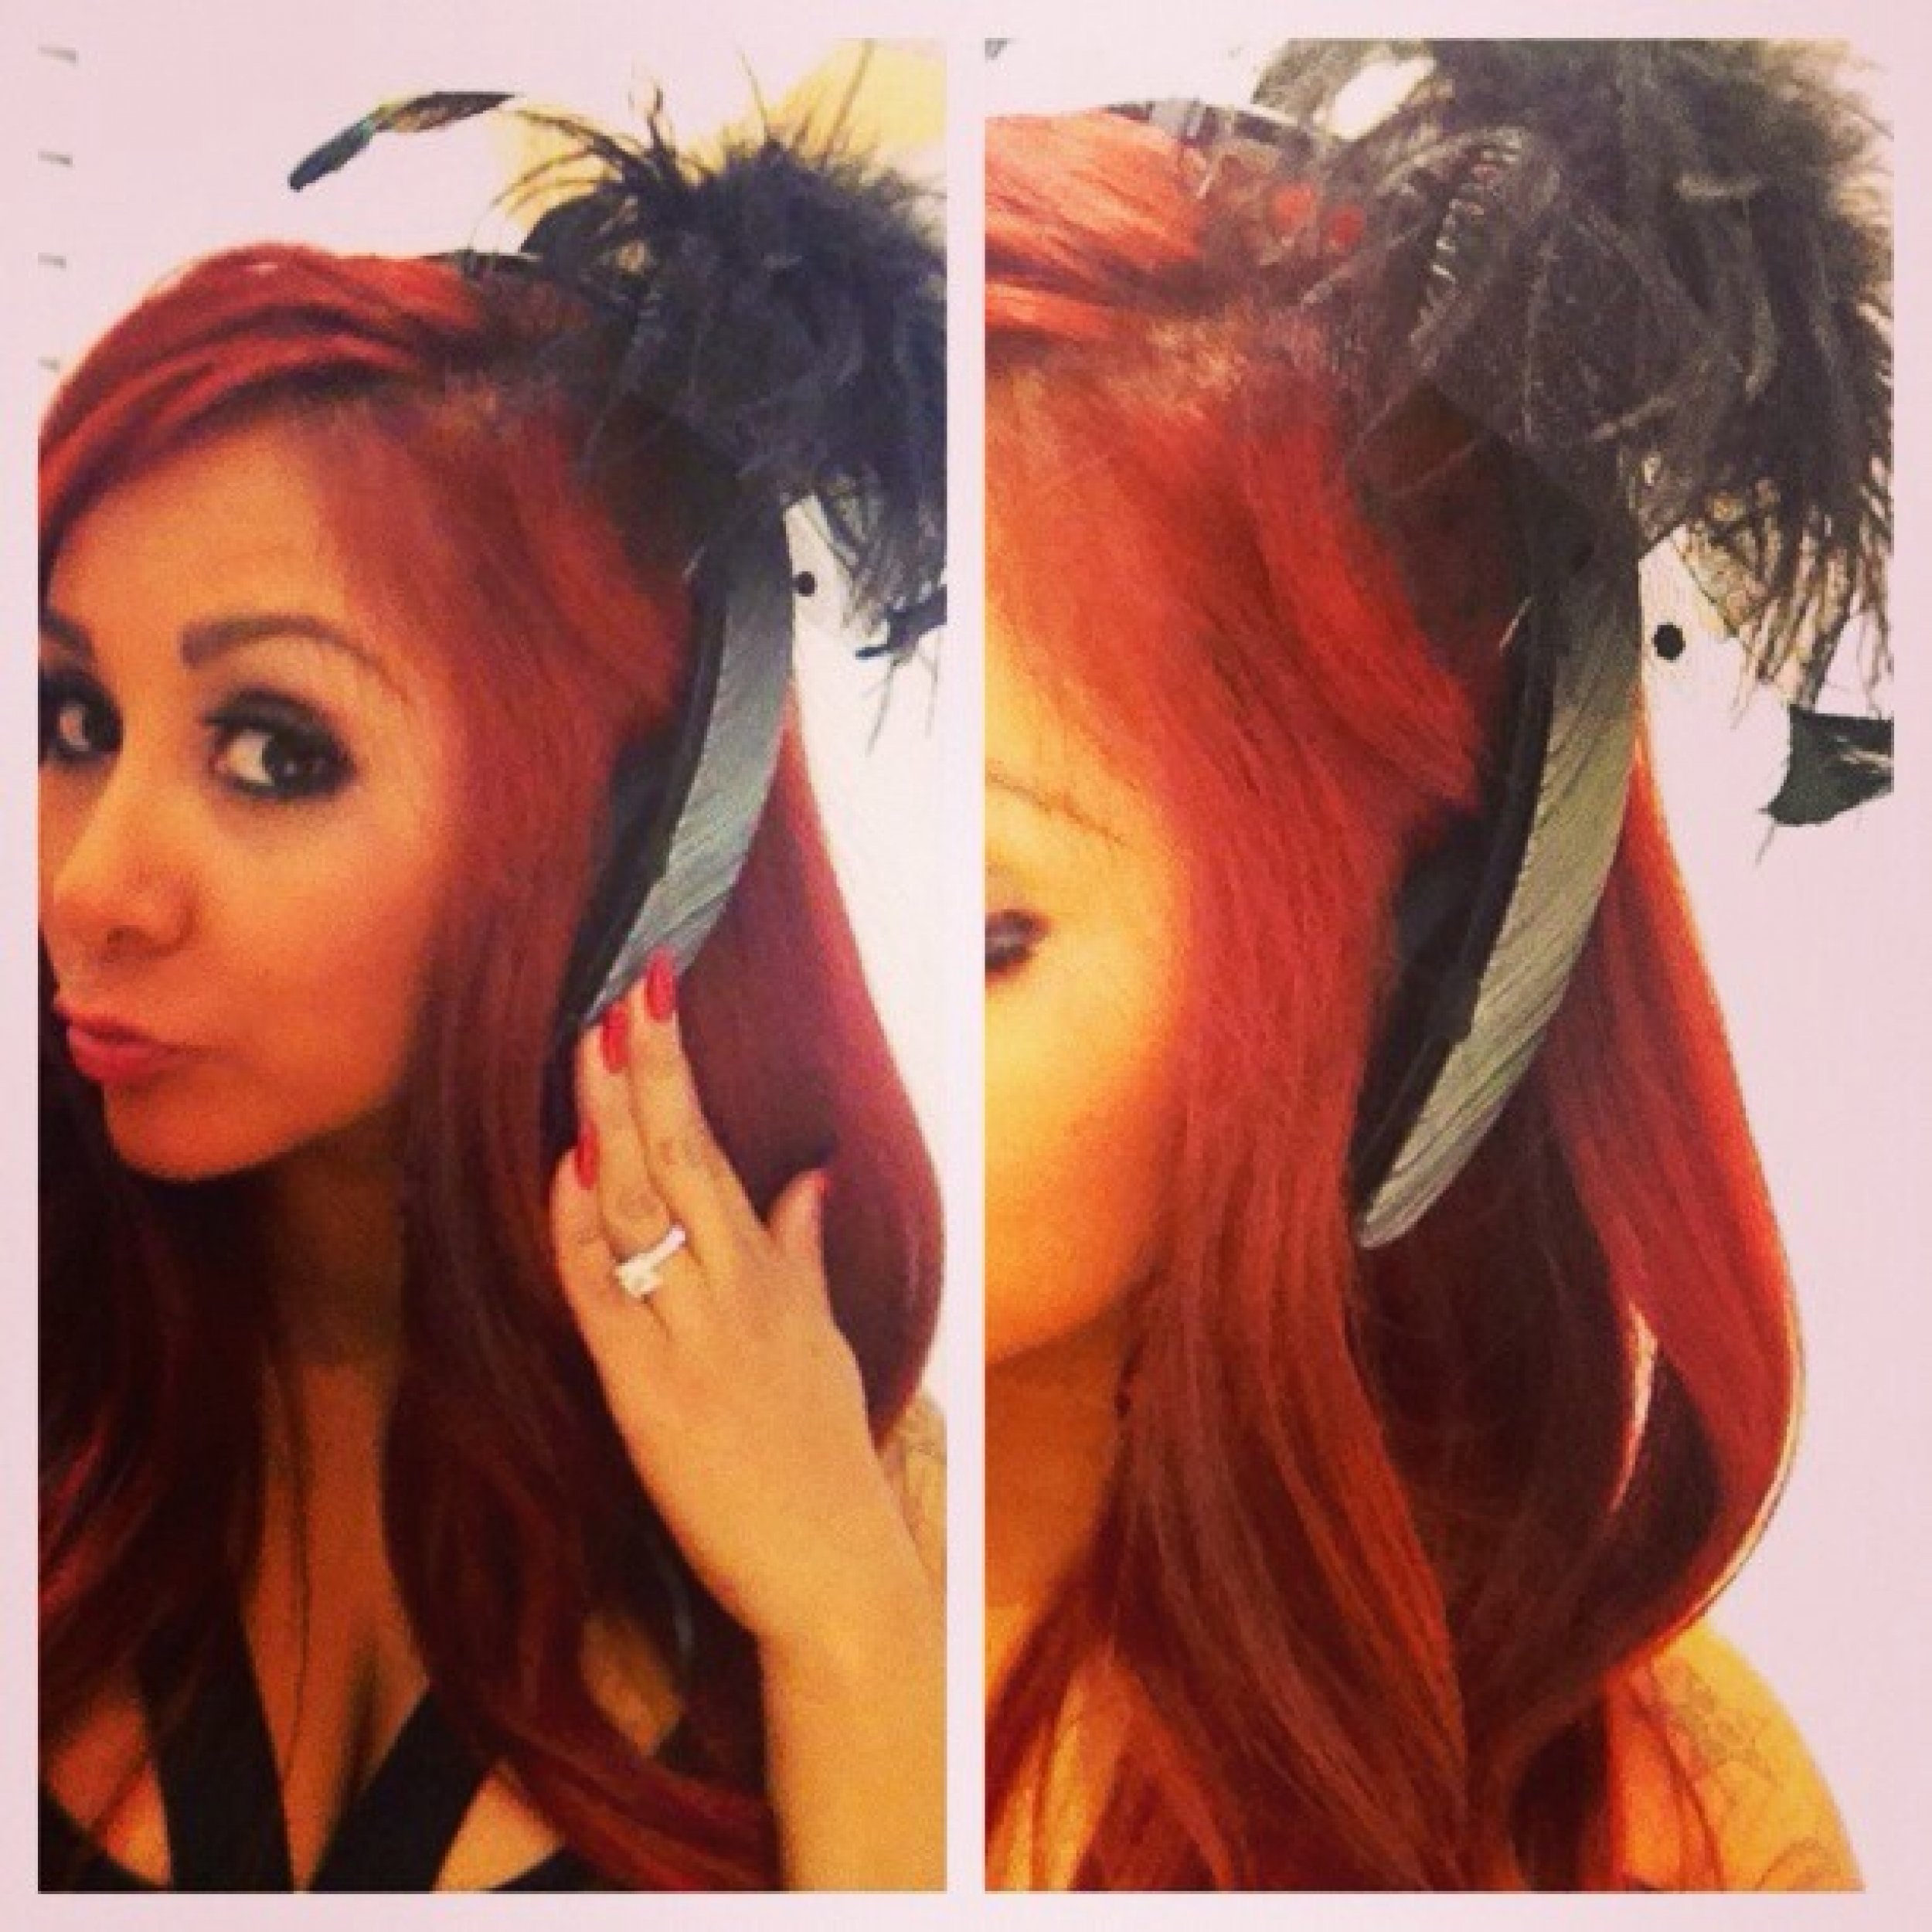 Snooki at CES